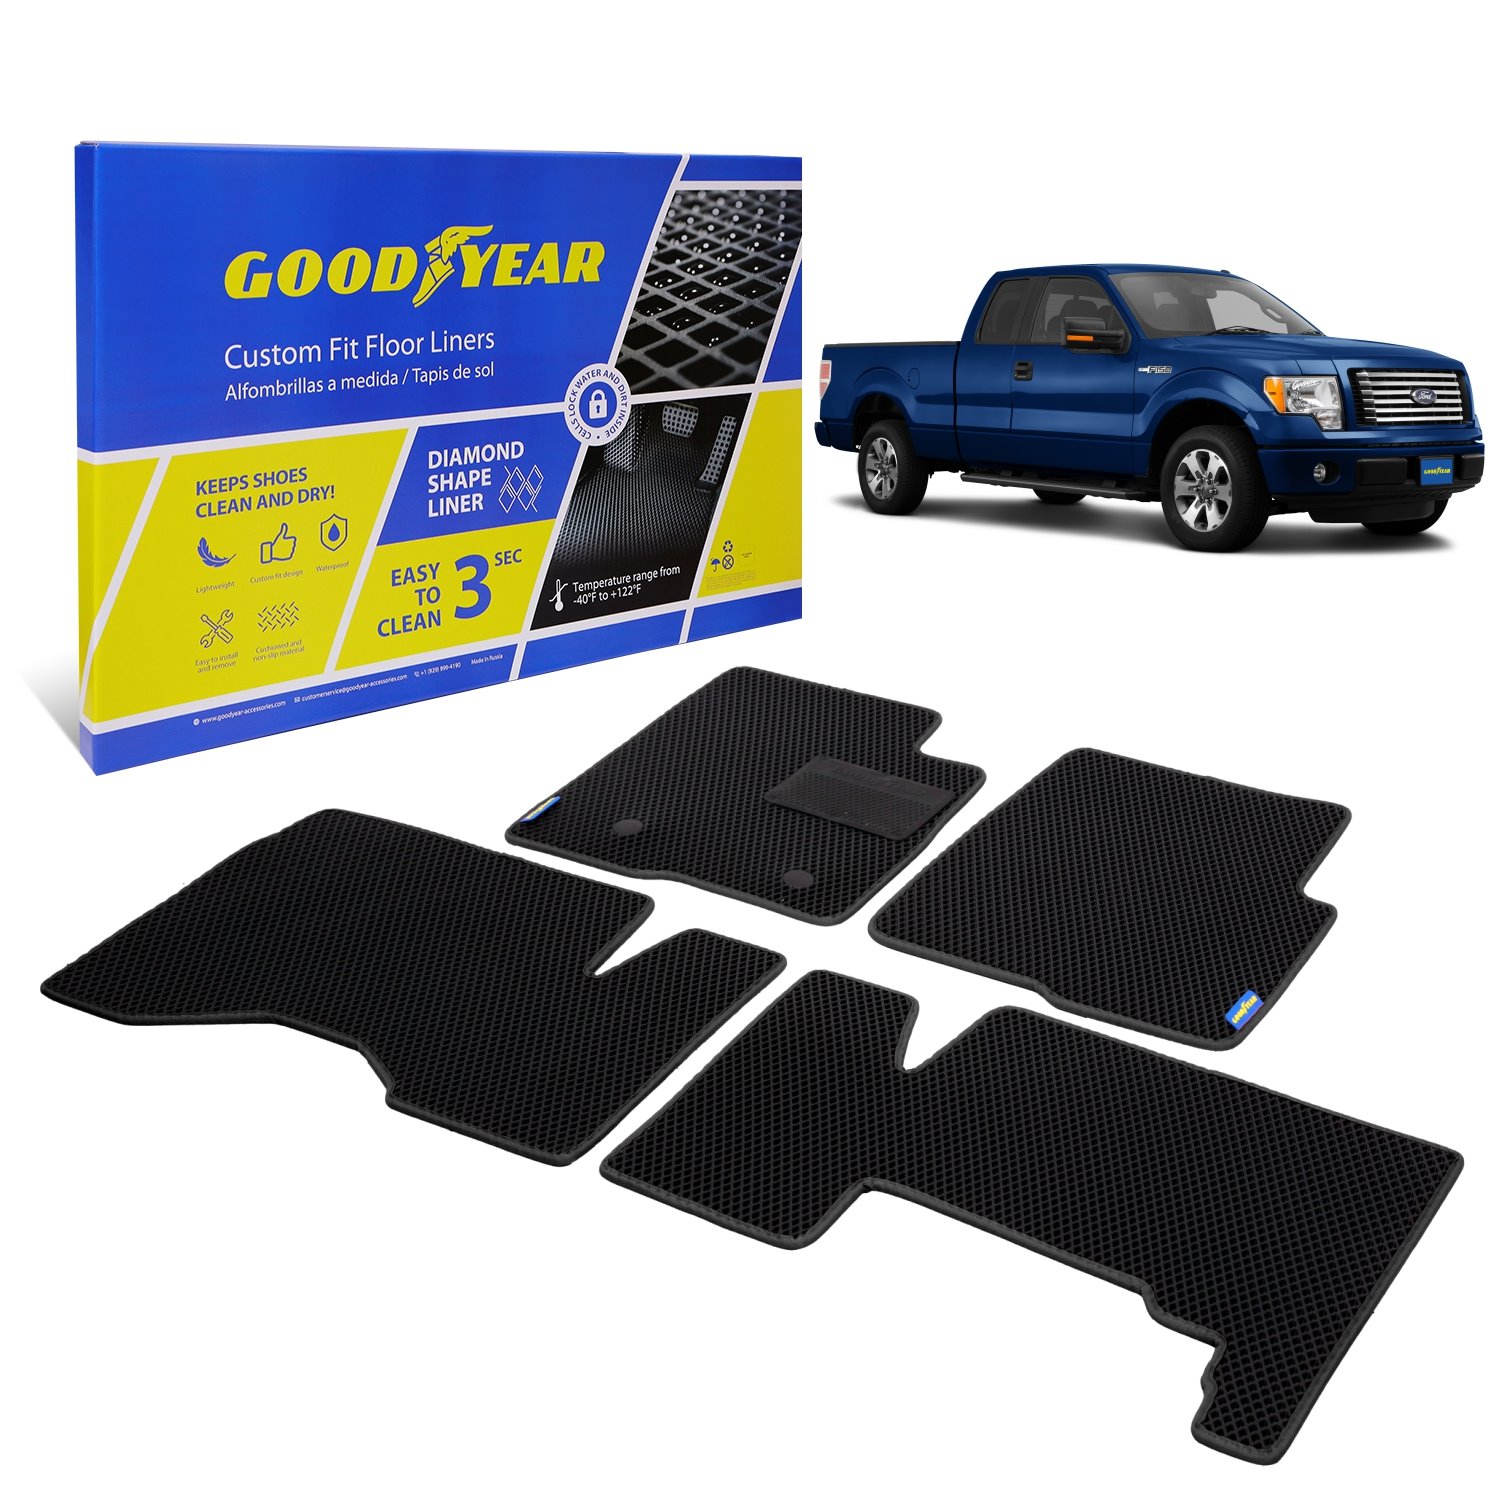 Goodyear Custom-Fit Floor Liners for 2009-2014 Ford F-150